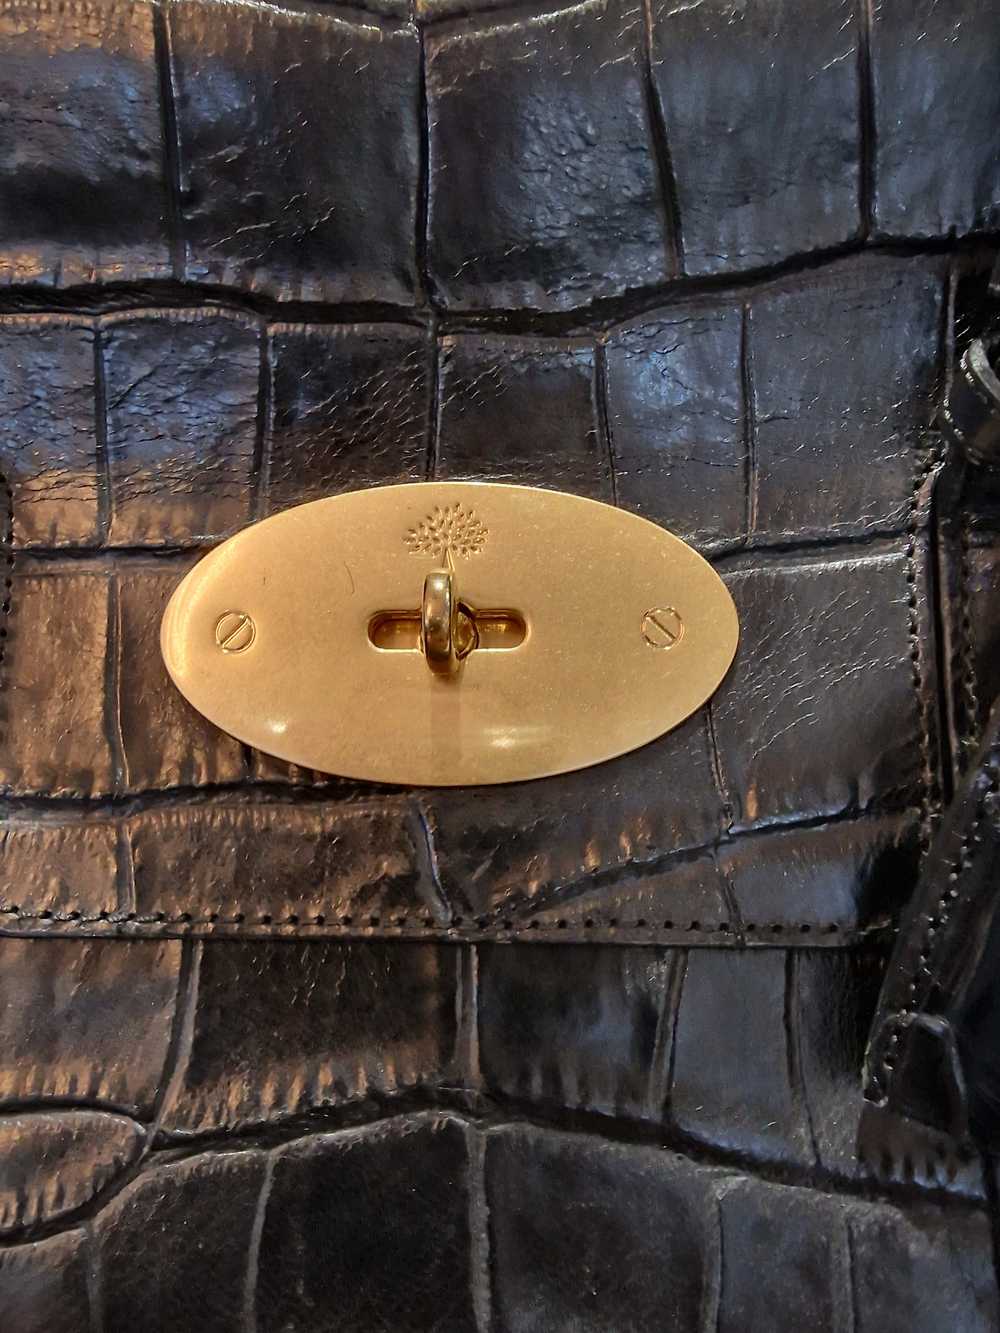 Mulberry Bayswater Black 'croc' effect leather bag - image 2